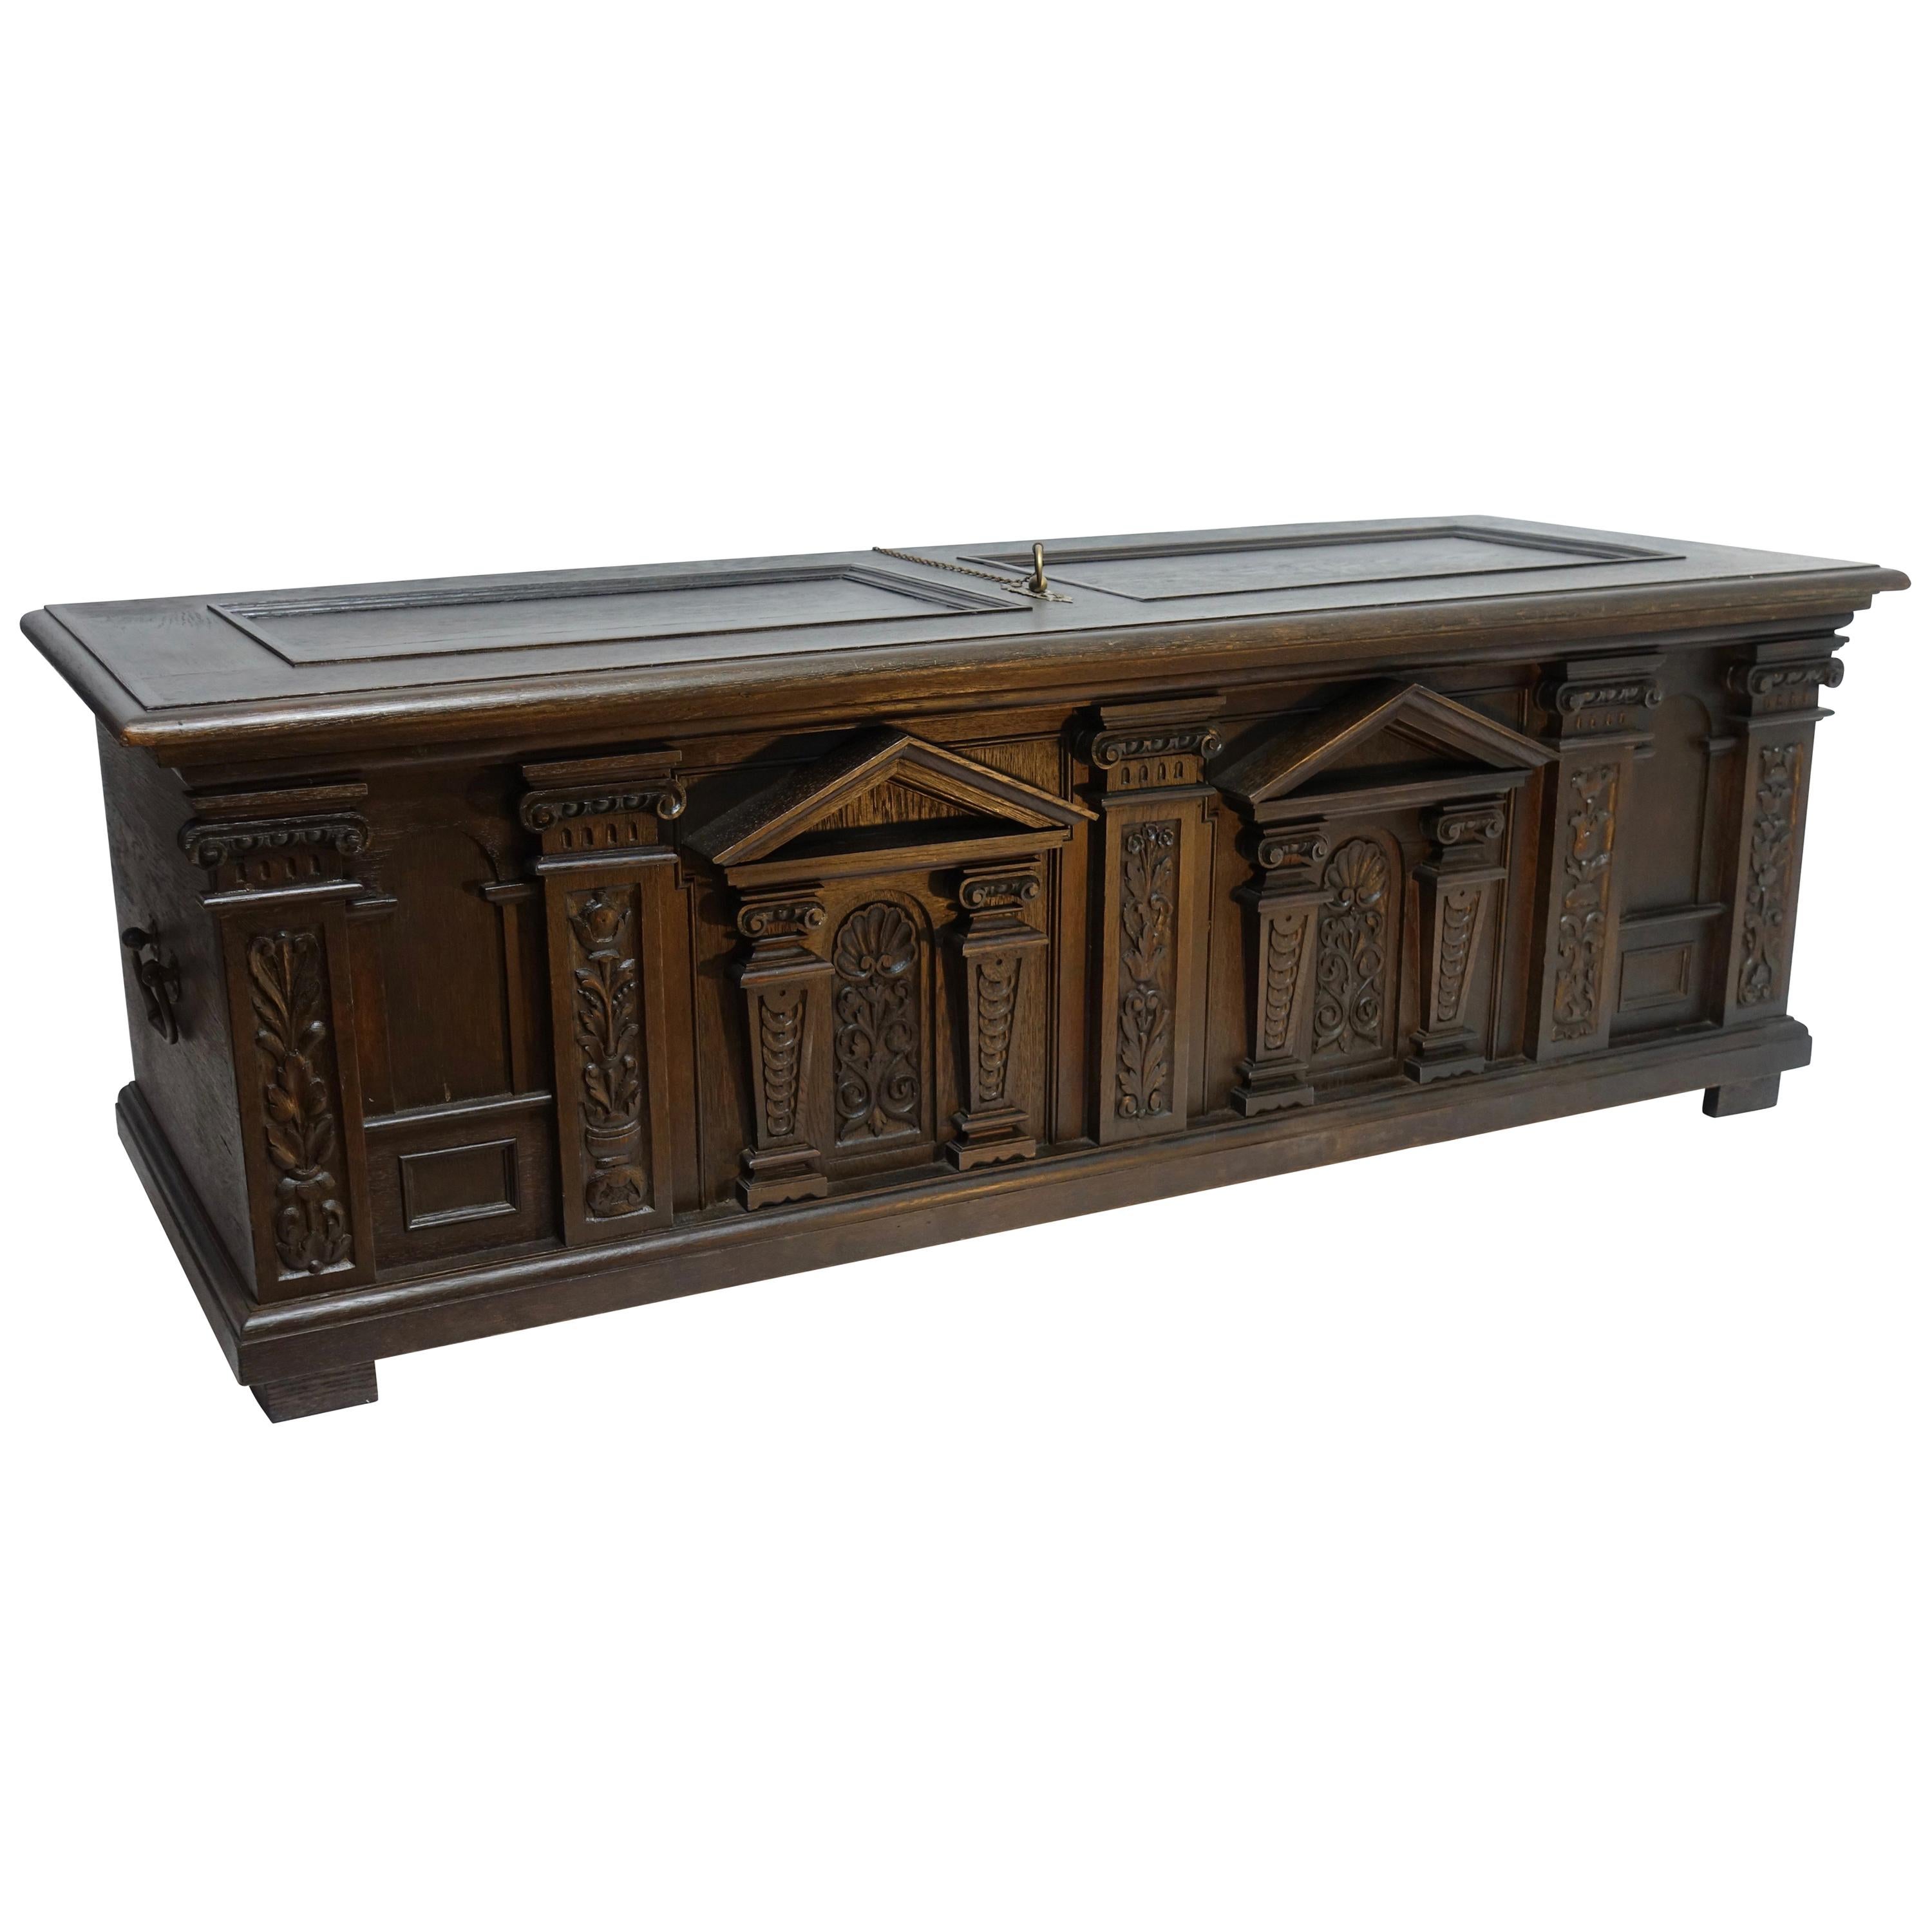 Neoclassical Oak Dowry Coffer with Architectural Detail, English 19th Century